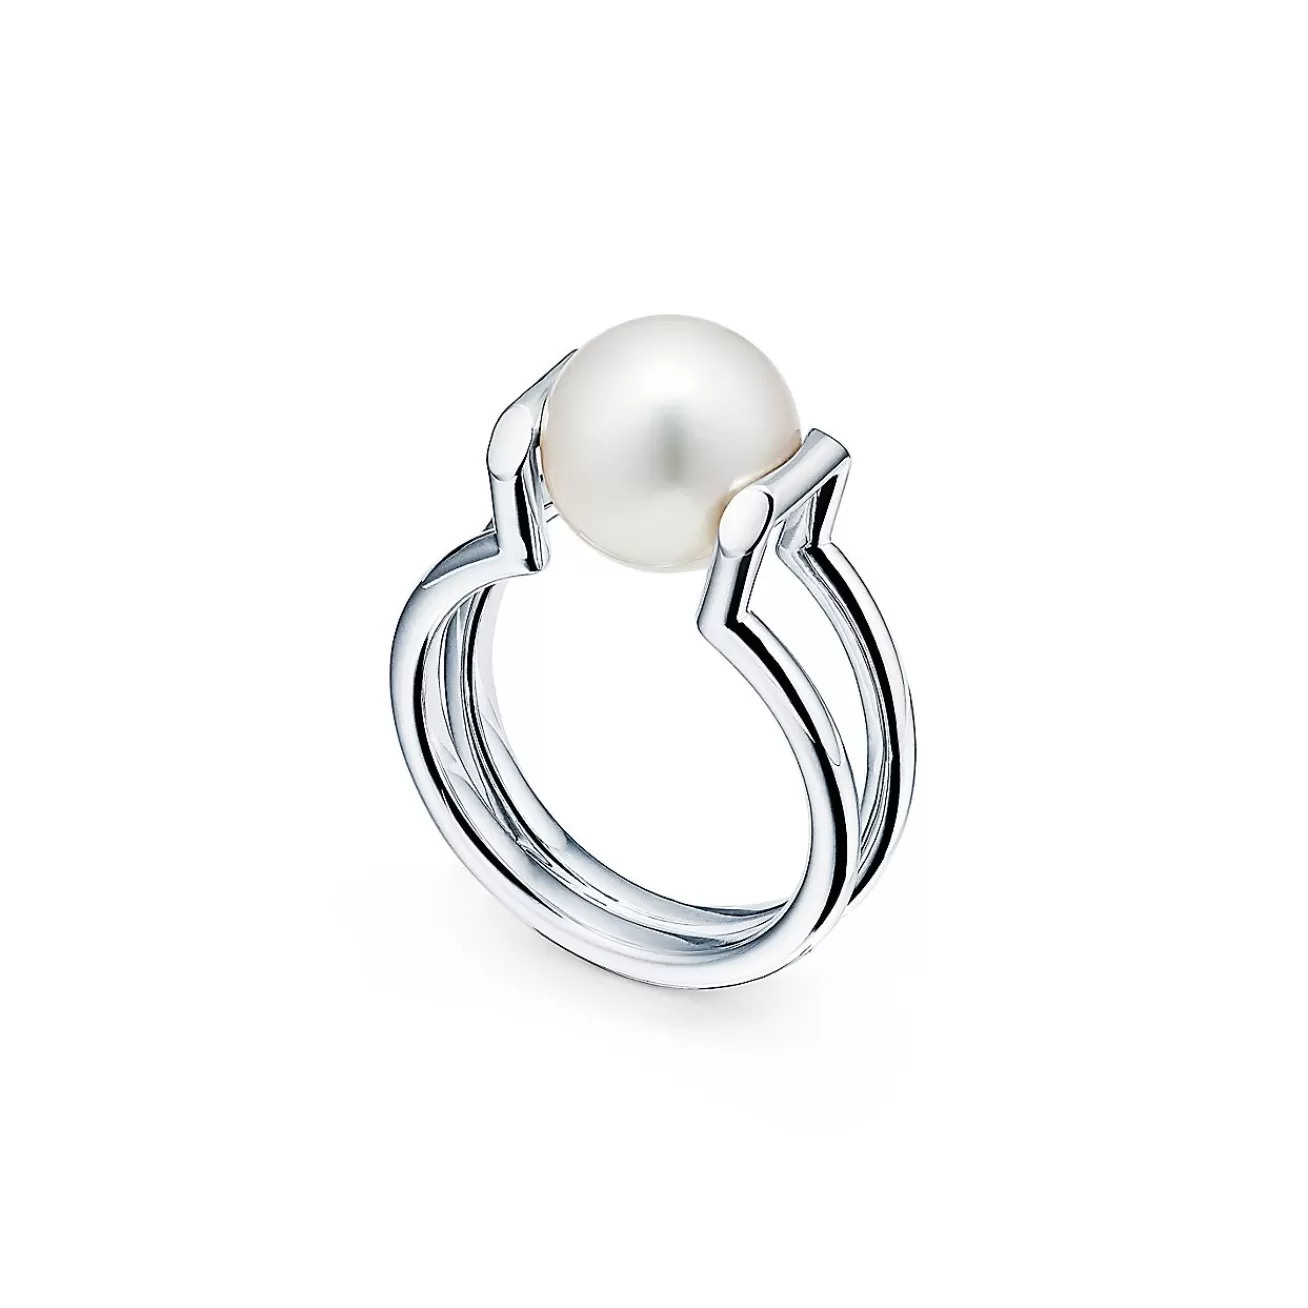 Tiffany & Co. Tiffany HardWear freshwater pearl ring in sterling silver. | ^ Rings | Gifts for Her